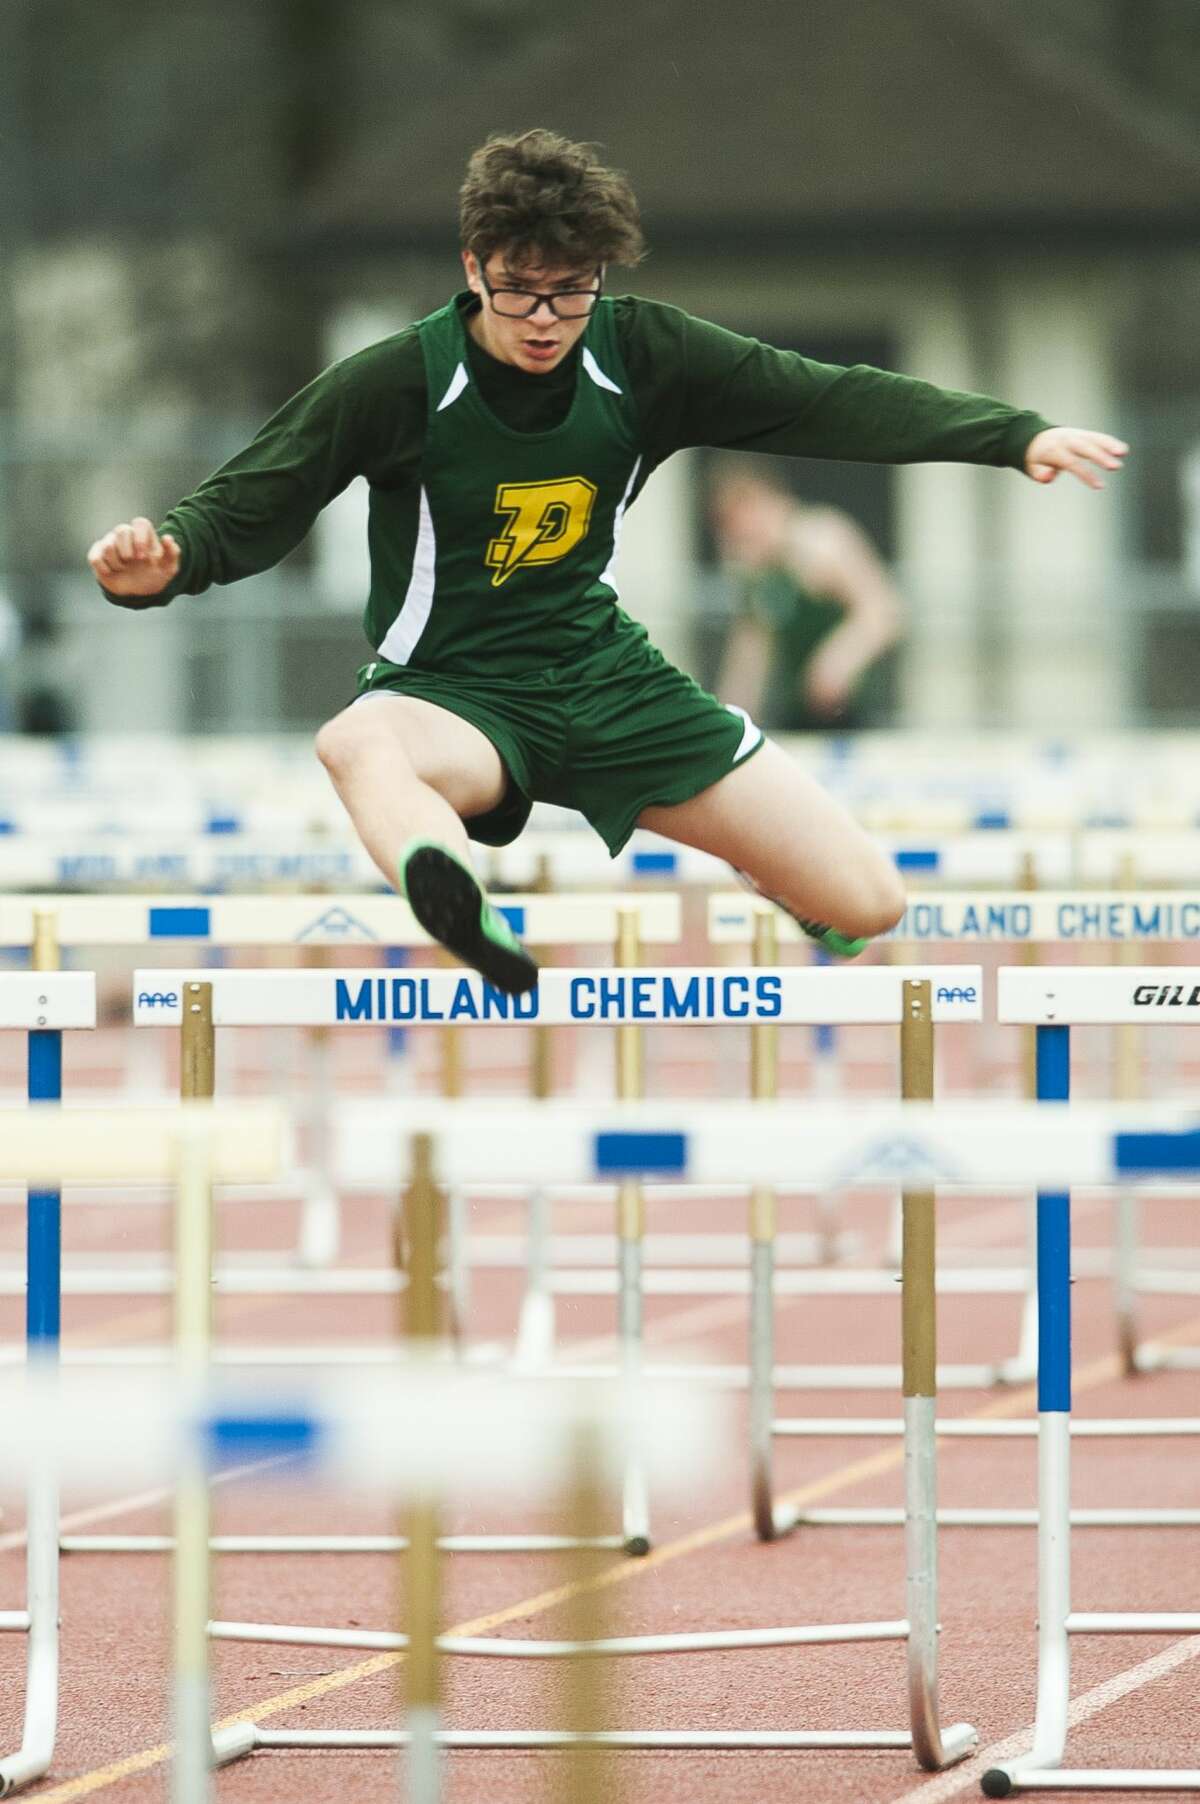 Dow's Mike Rettelle competes in a hurdle event during the Graves/Swayze Relays on Thursday, April 18, 2019 at Midland Community Stadium. (Katy Kildee/kkildee@mdn.net)